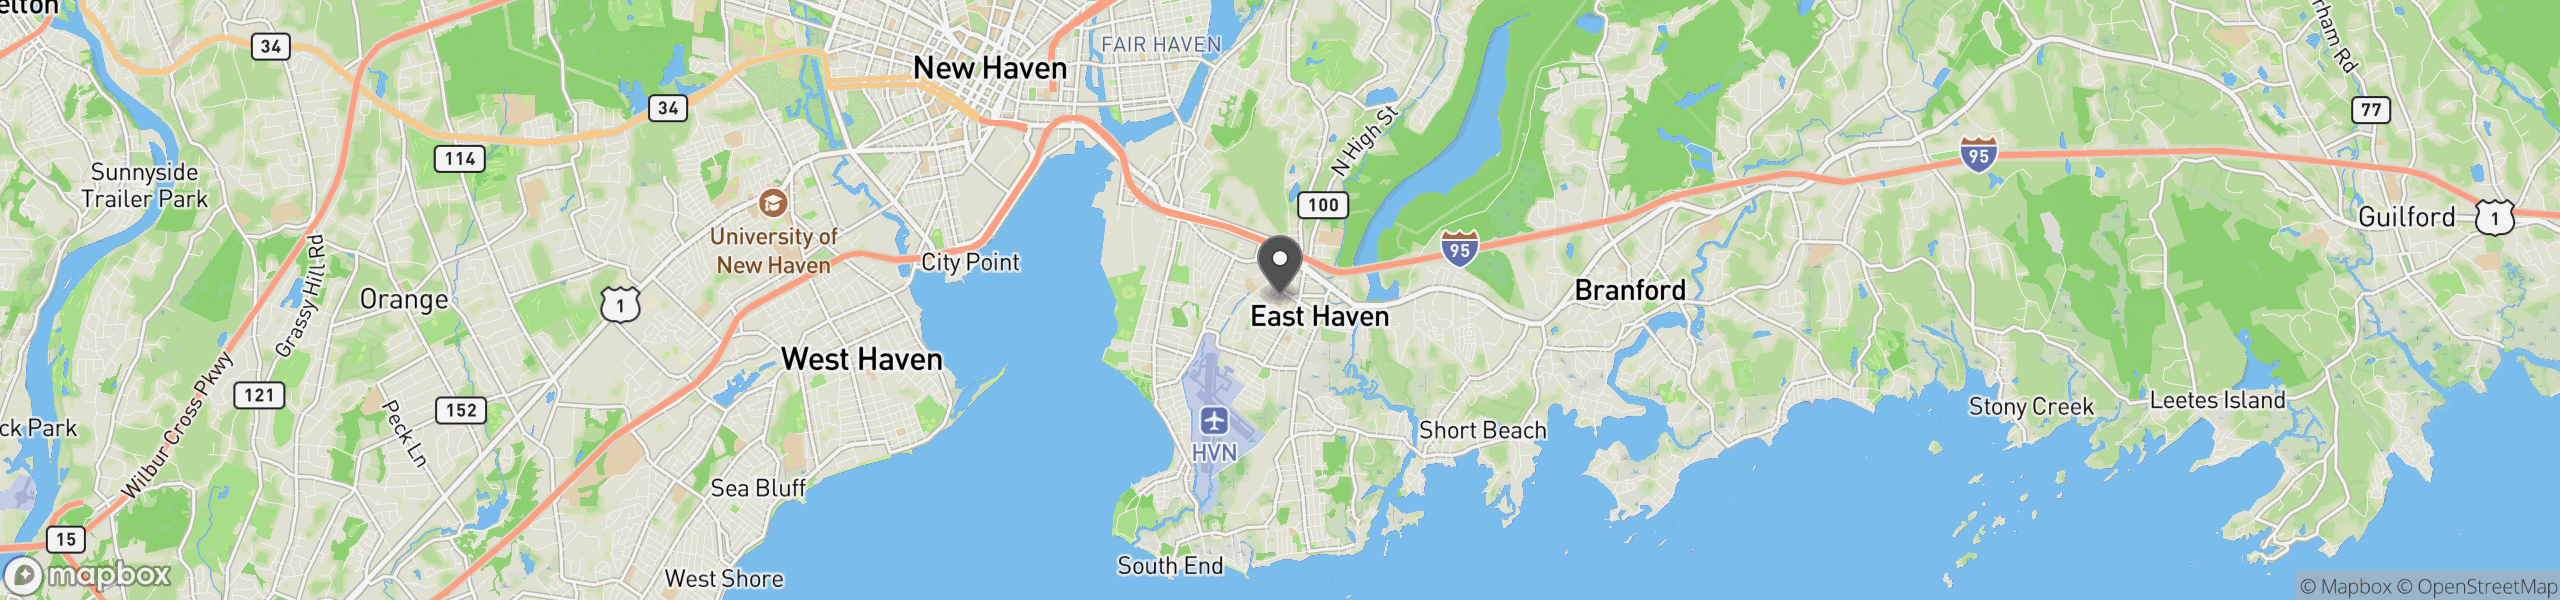 East Haven, CT 06512